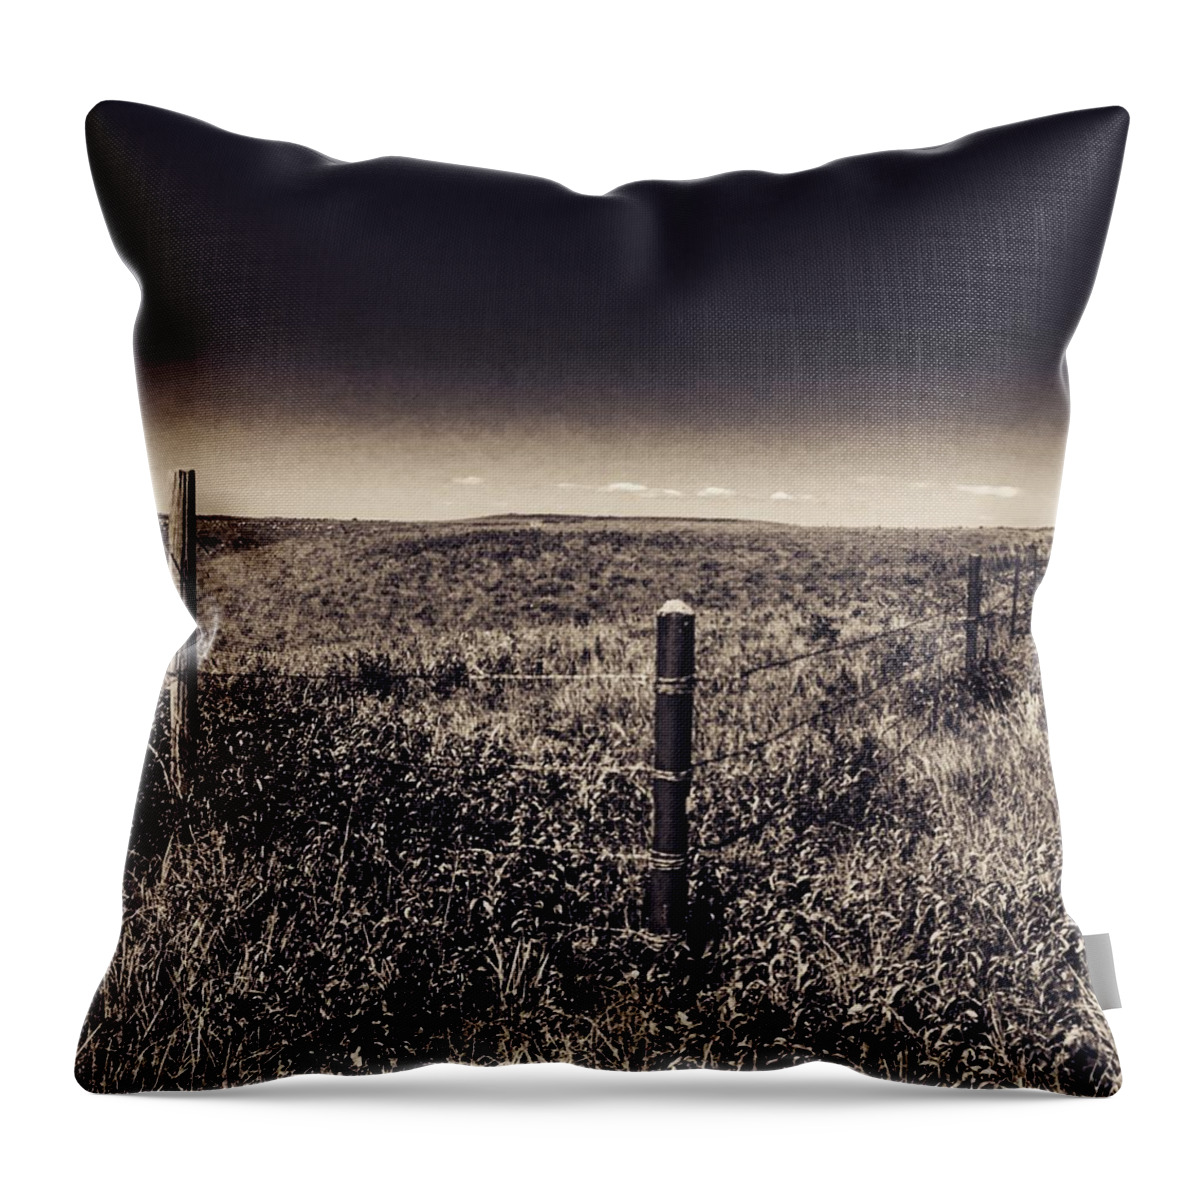 Konza Throw Pillow featuring the digital art The End of the Range by Michael Oceanofwisdom Bidwell